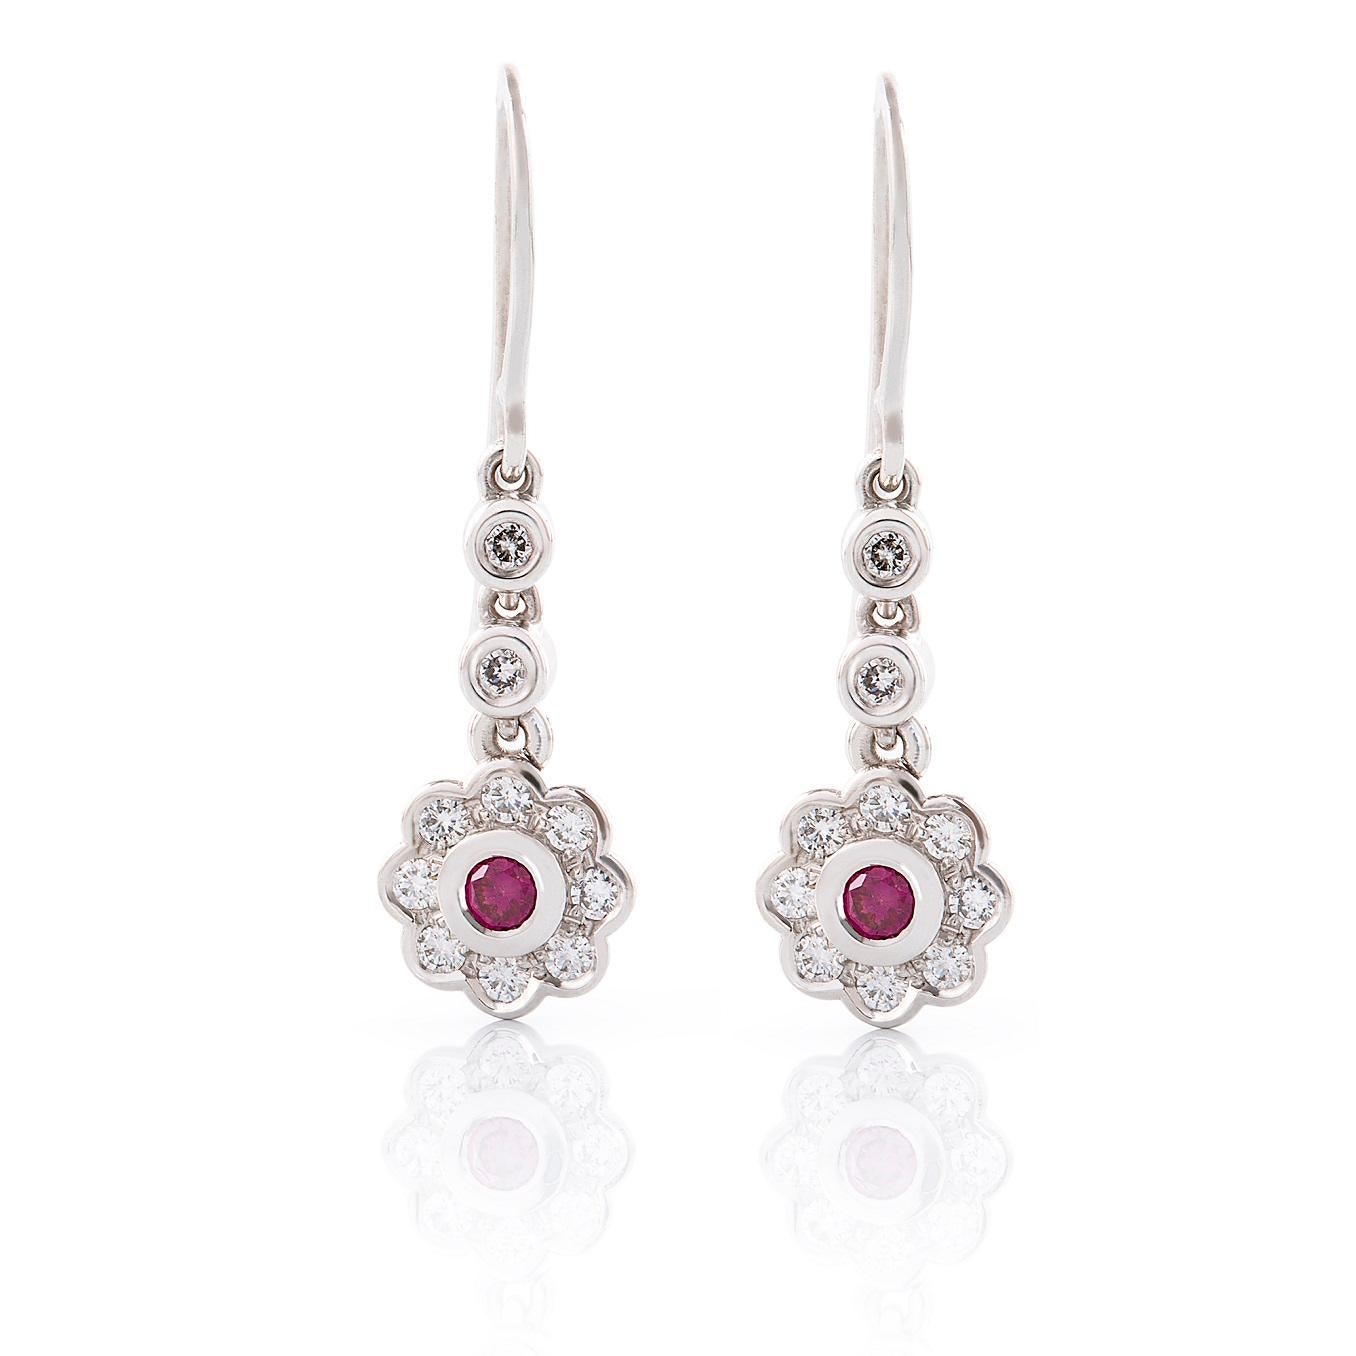 Cluster Diamante Earrings

The perfect complement to any lady. These gorgeous diamond cluster drop earrings are featured a pair of treated pink diamonds with the surrounding white diamonds, simple and elegant.

Round brilliant cut diamonds: Treated